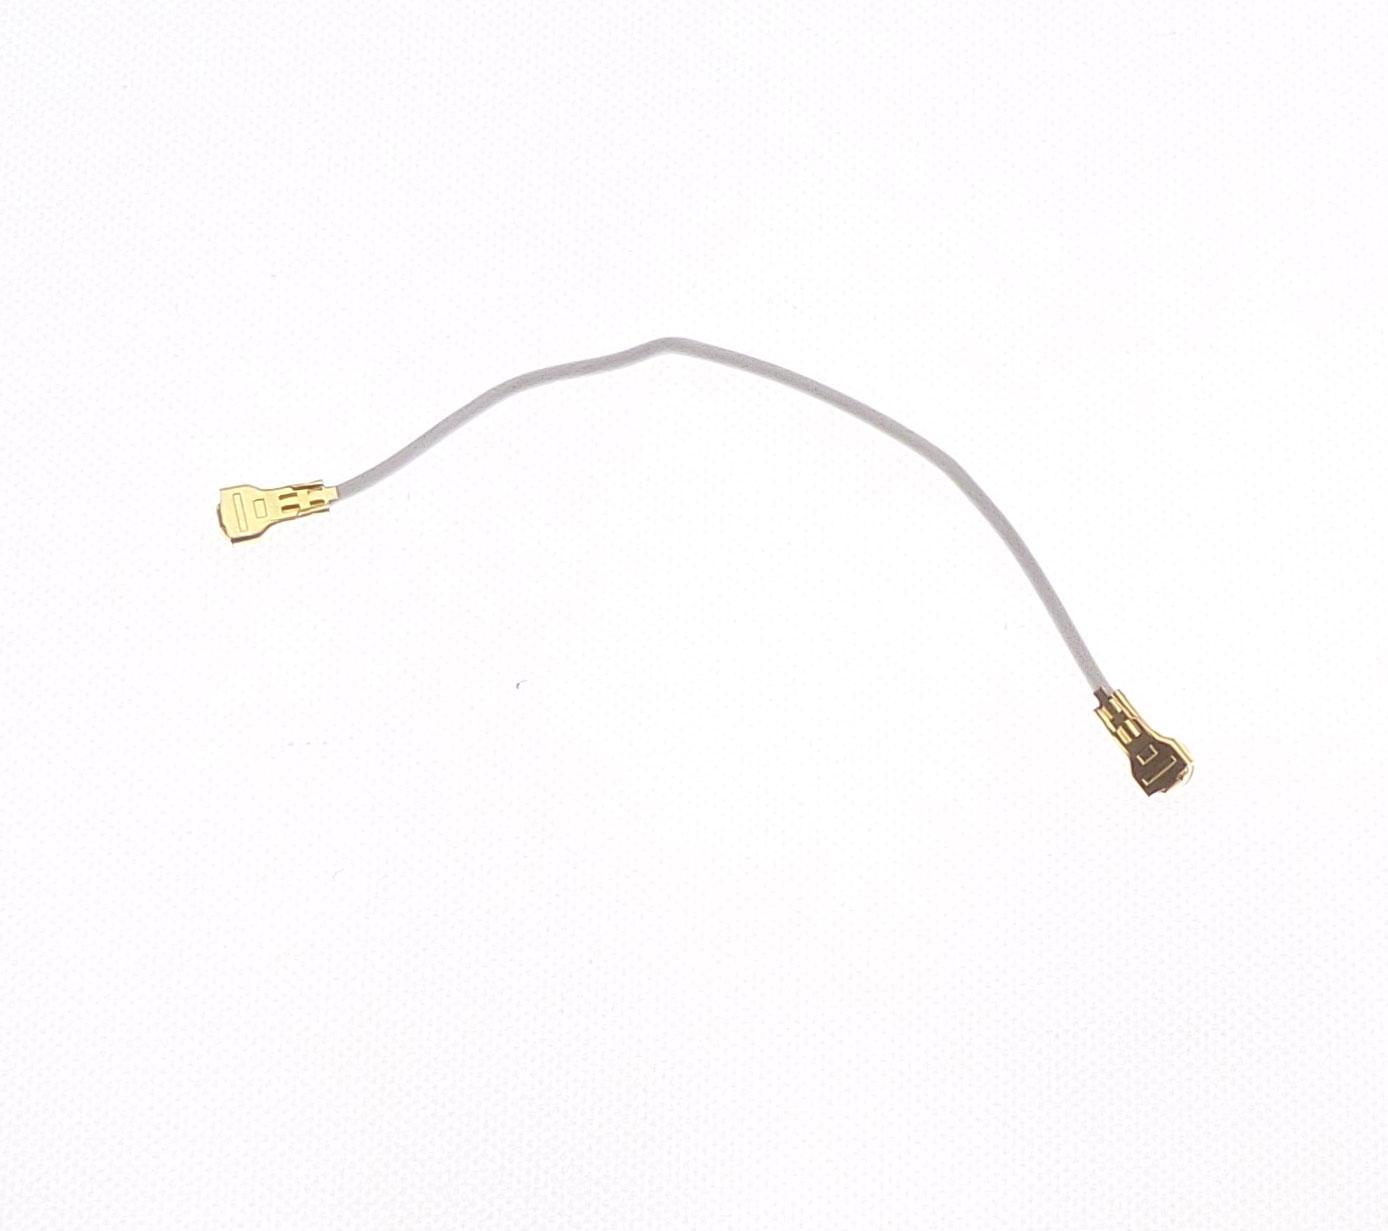 Cable coaxial blanc pour Samsung Galaxy S5 SM-G900F G900A